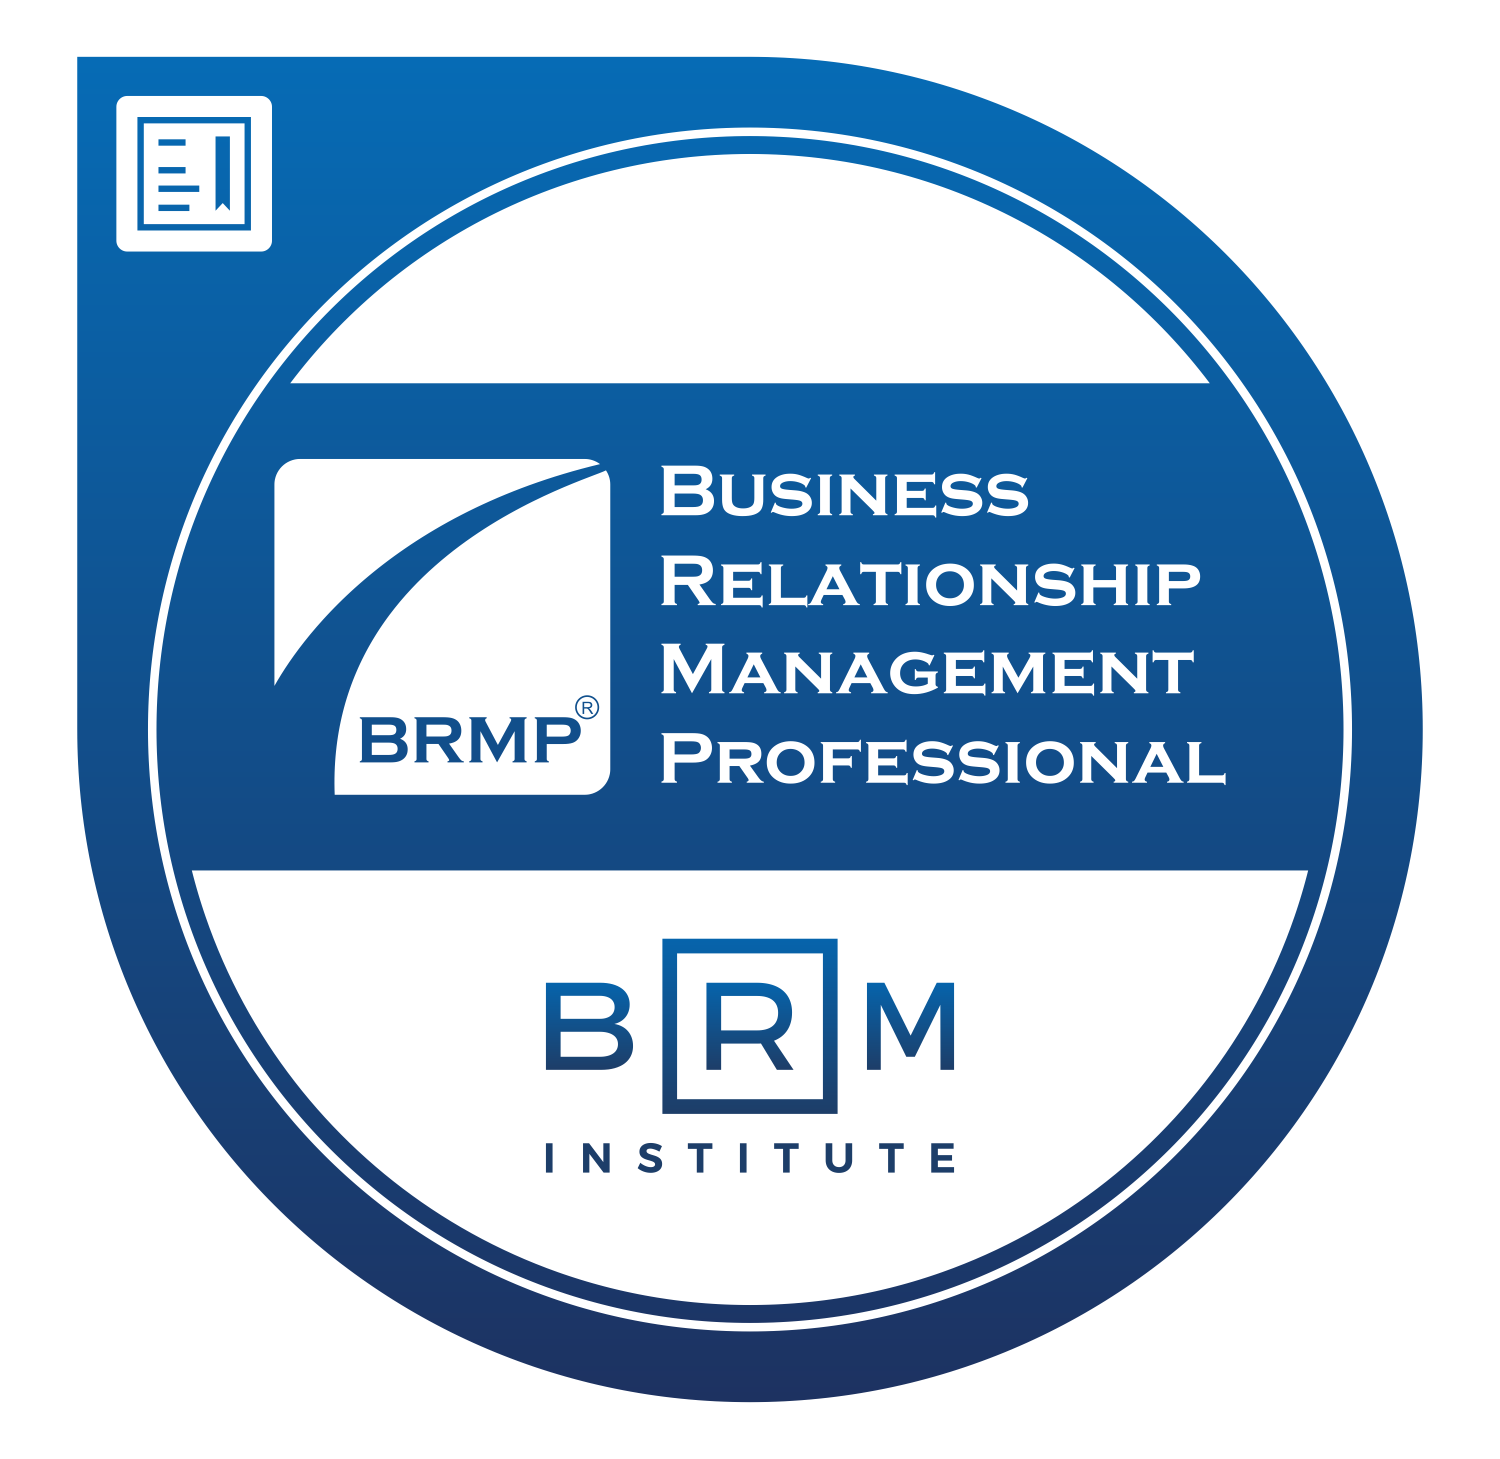 Prerequisites Legacy BRM Professional Training Course